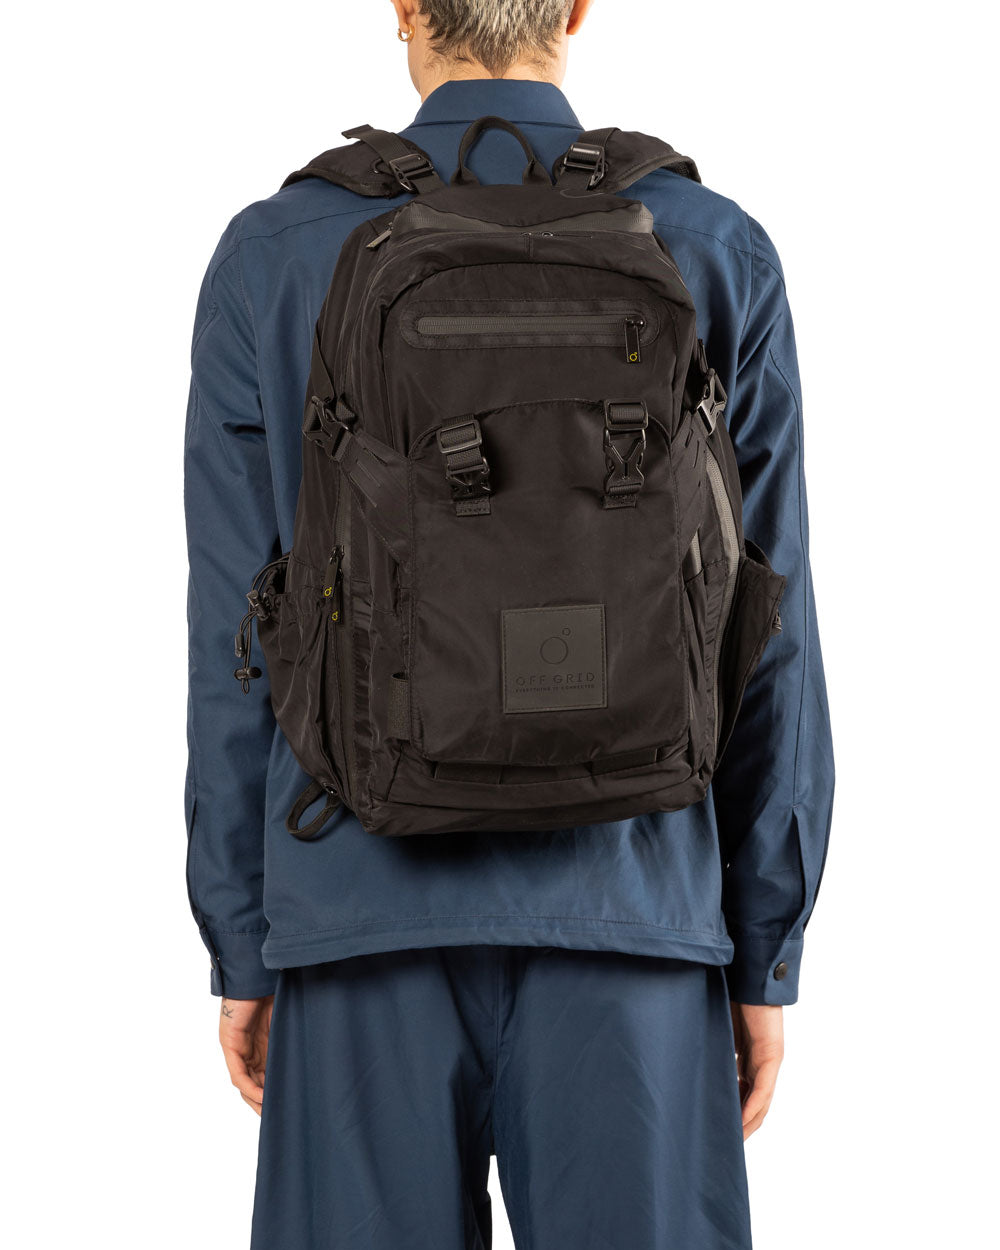 Movement backpack